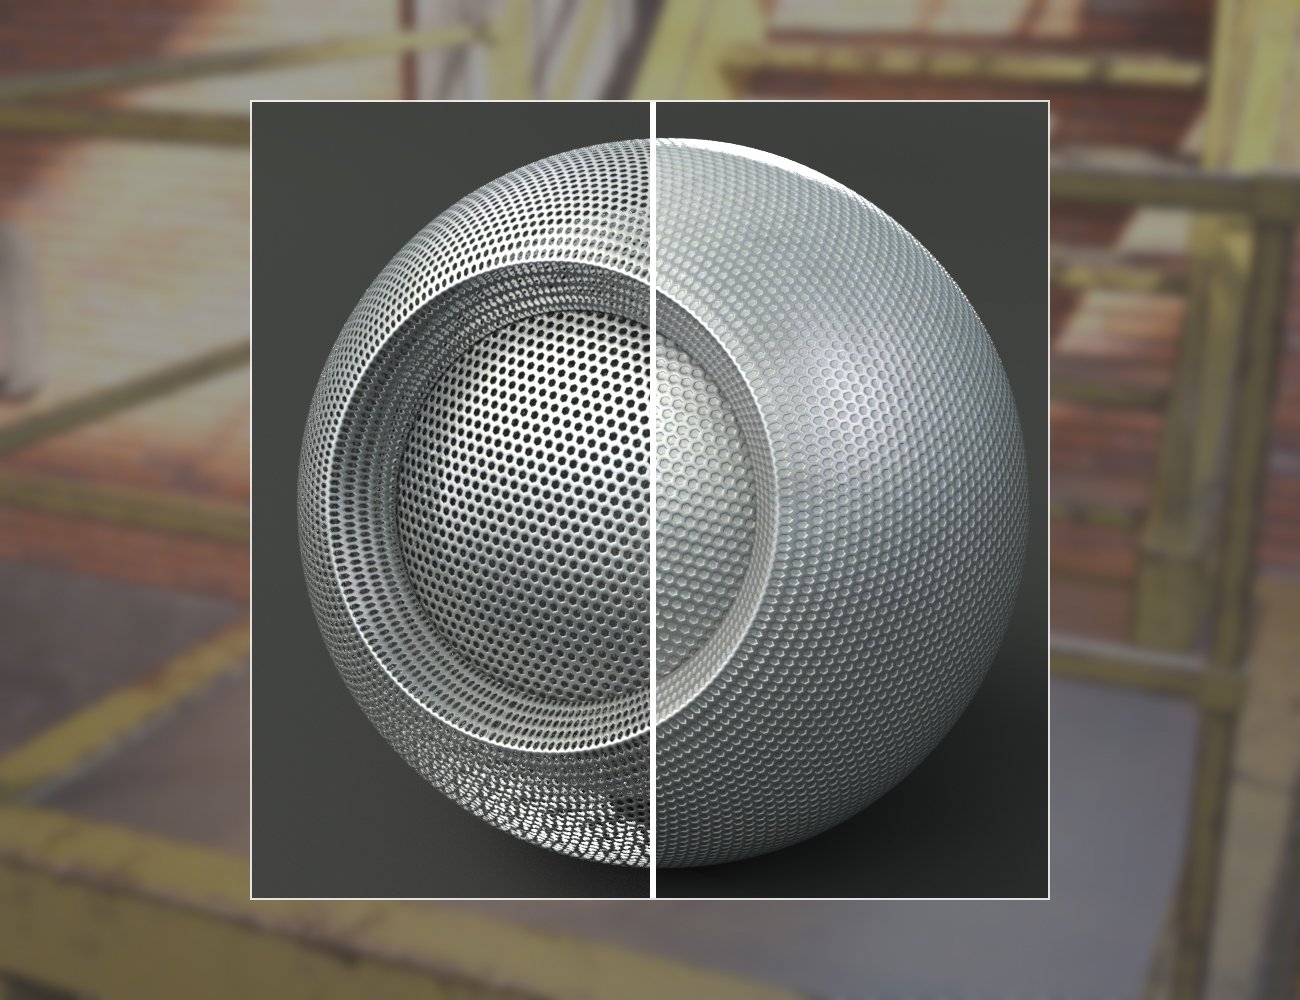 Embossed and Perforated Metal - Iray Shaders by: Dimidrol, 3D Models by Daz 3D